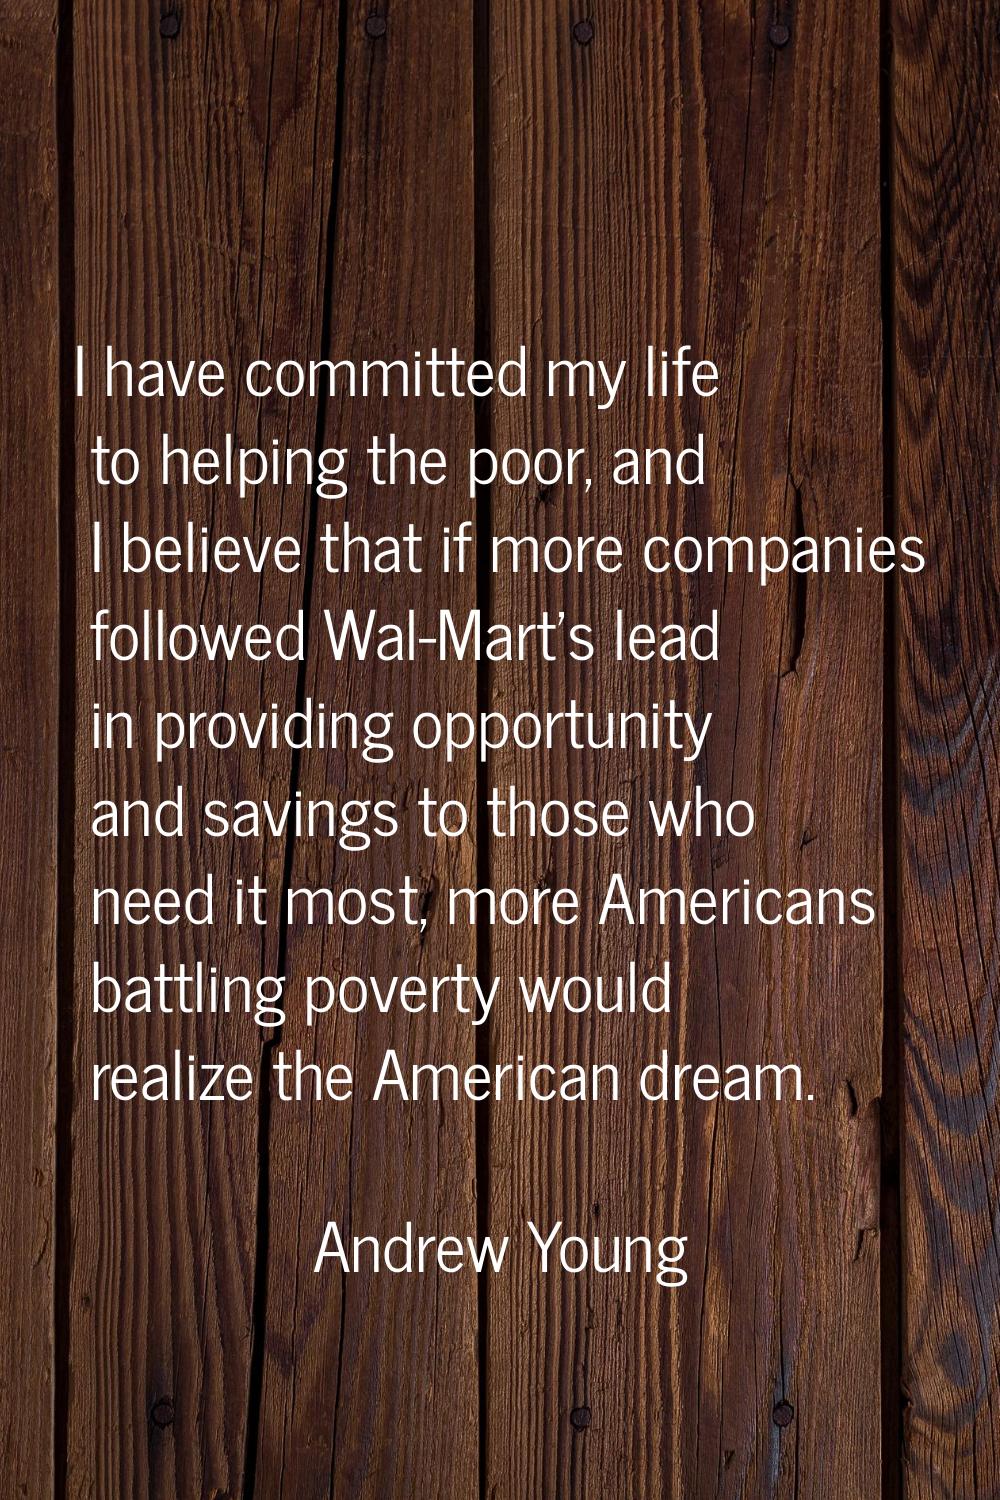 I have committed my life to helping the poor, and I believe that if more companies followed Wal-Mar